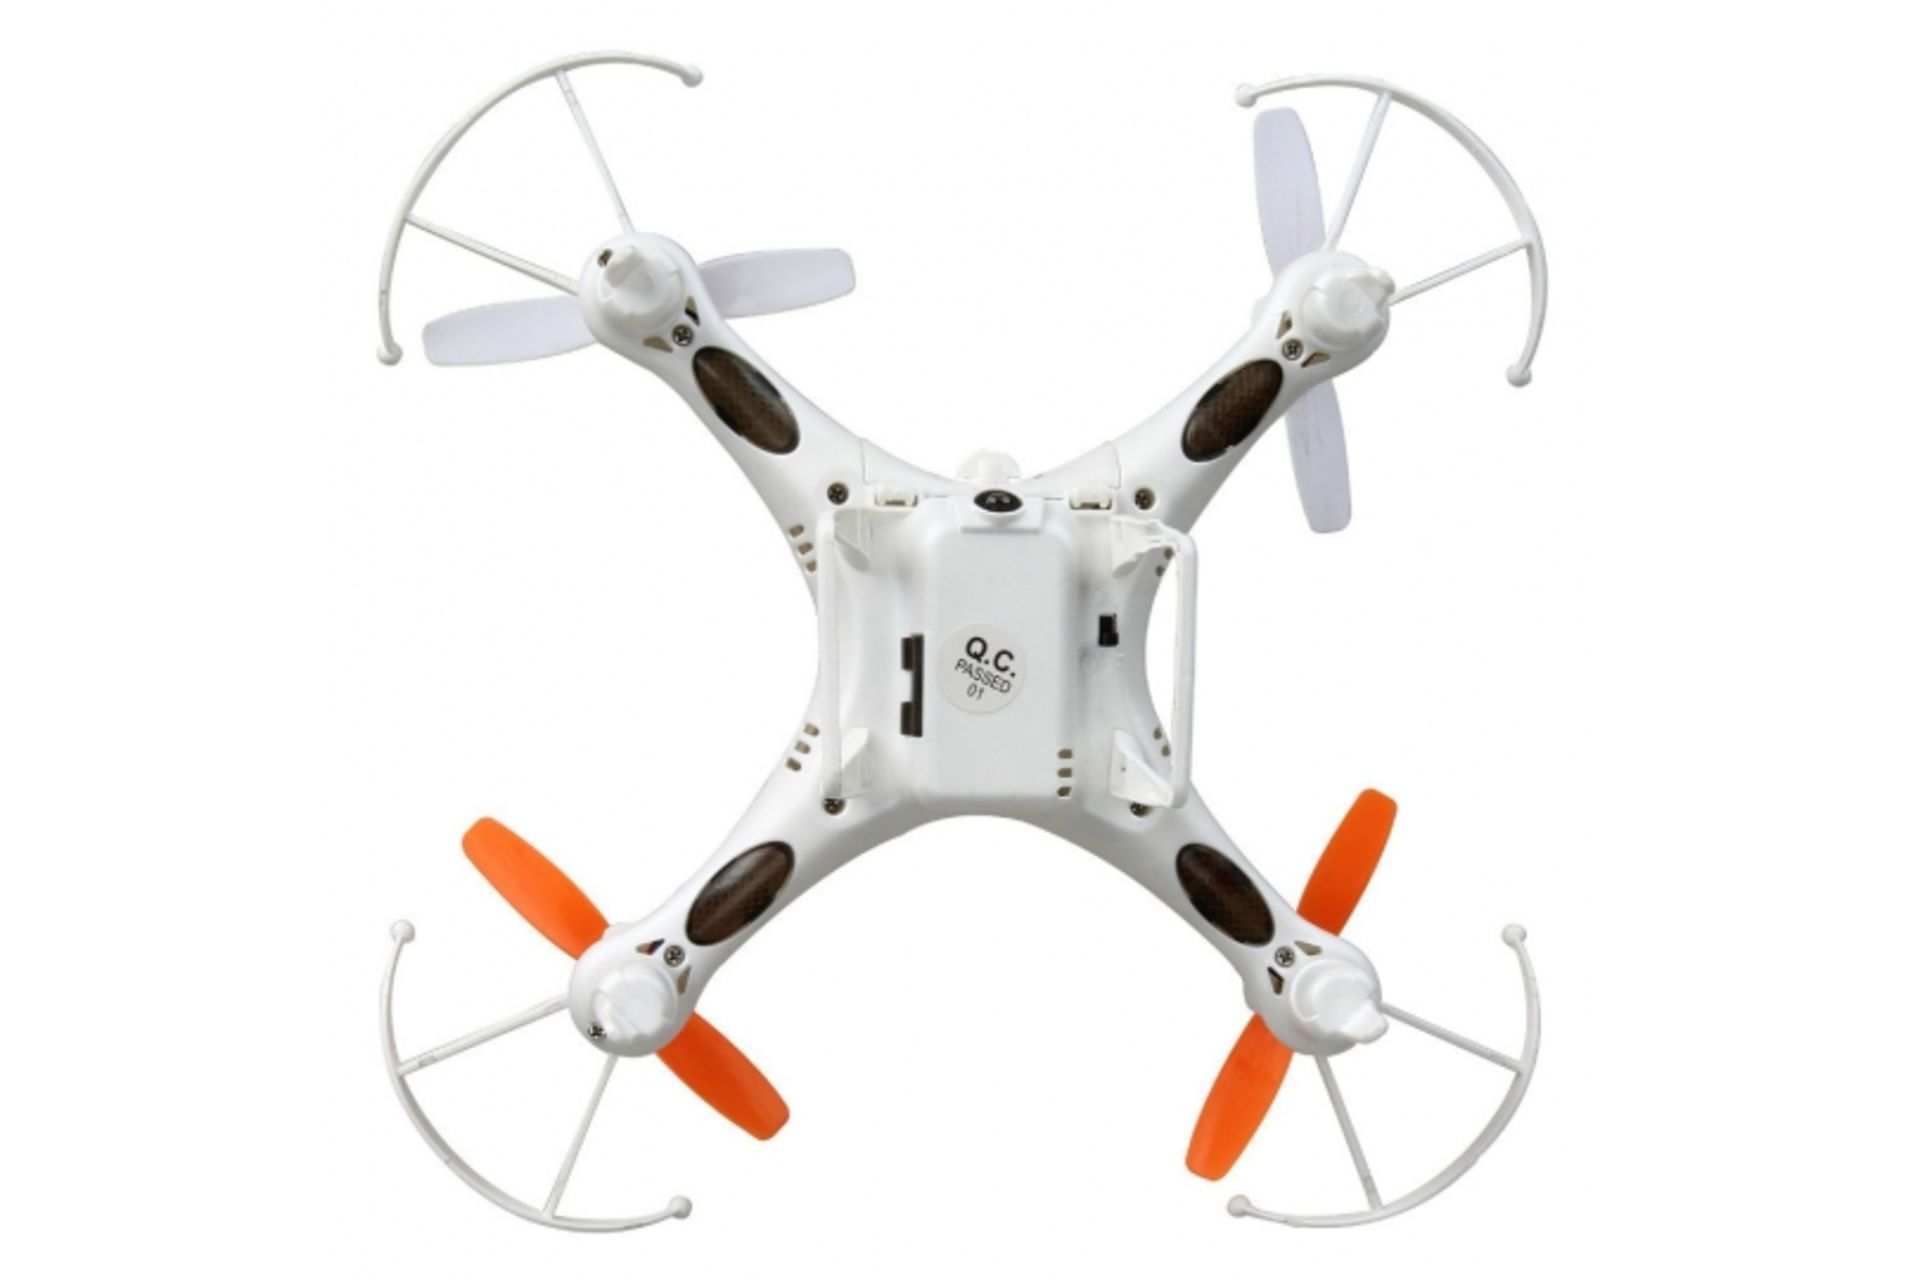 SKYTEC RC QUADCOPTER 4 CHANNEL 6 AXIS 2.4Ghz BNIB - Image 2 of 13